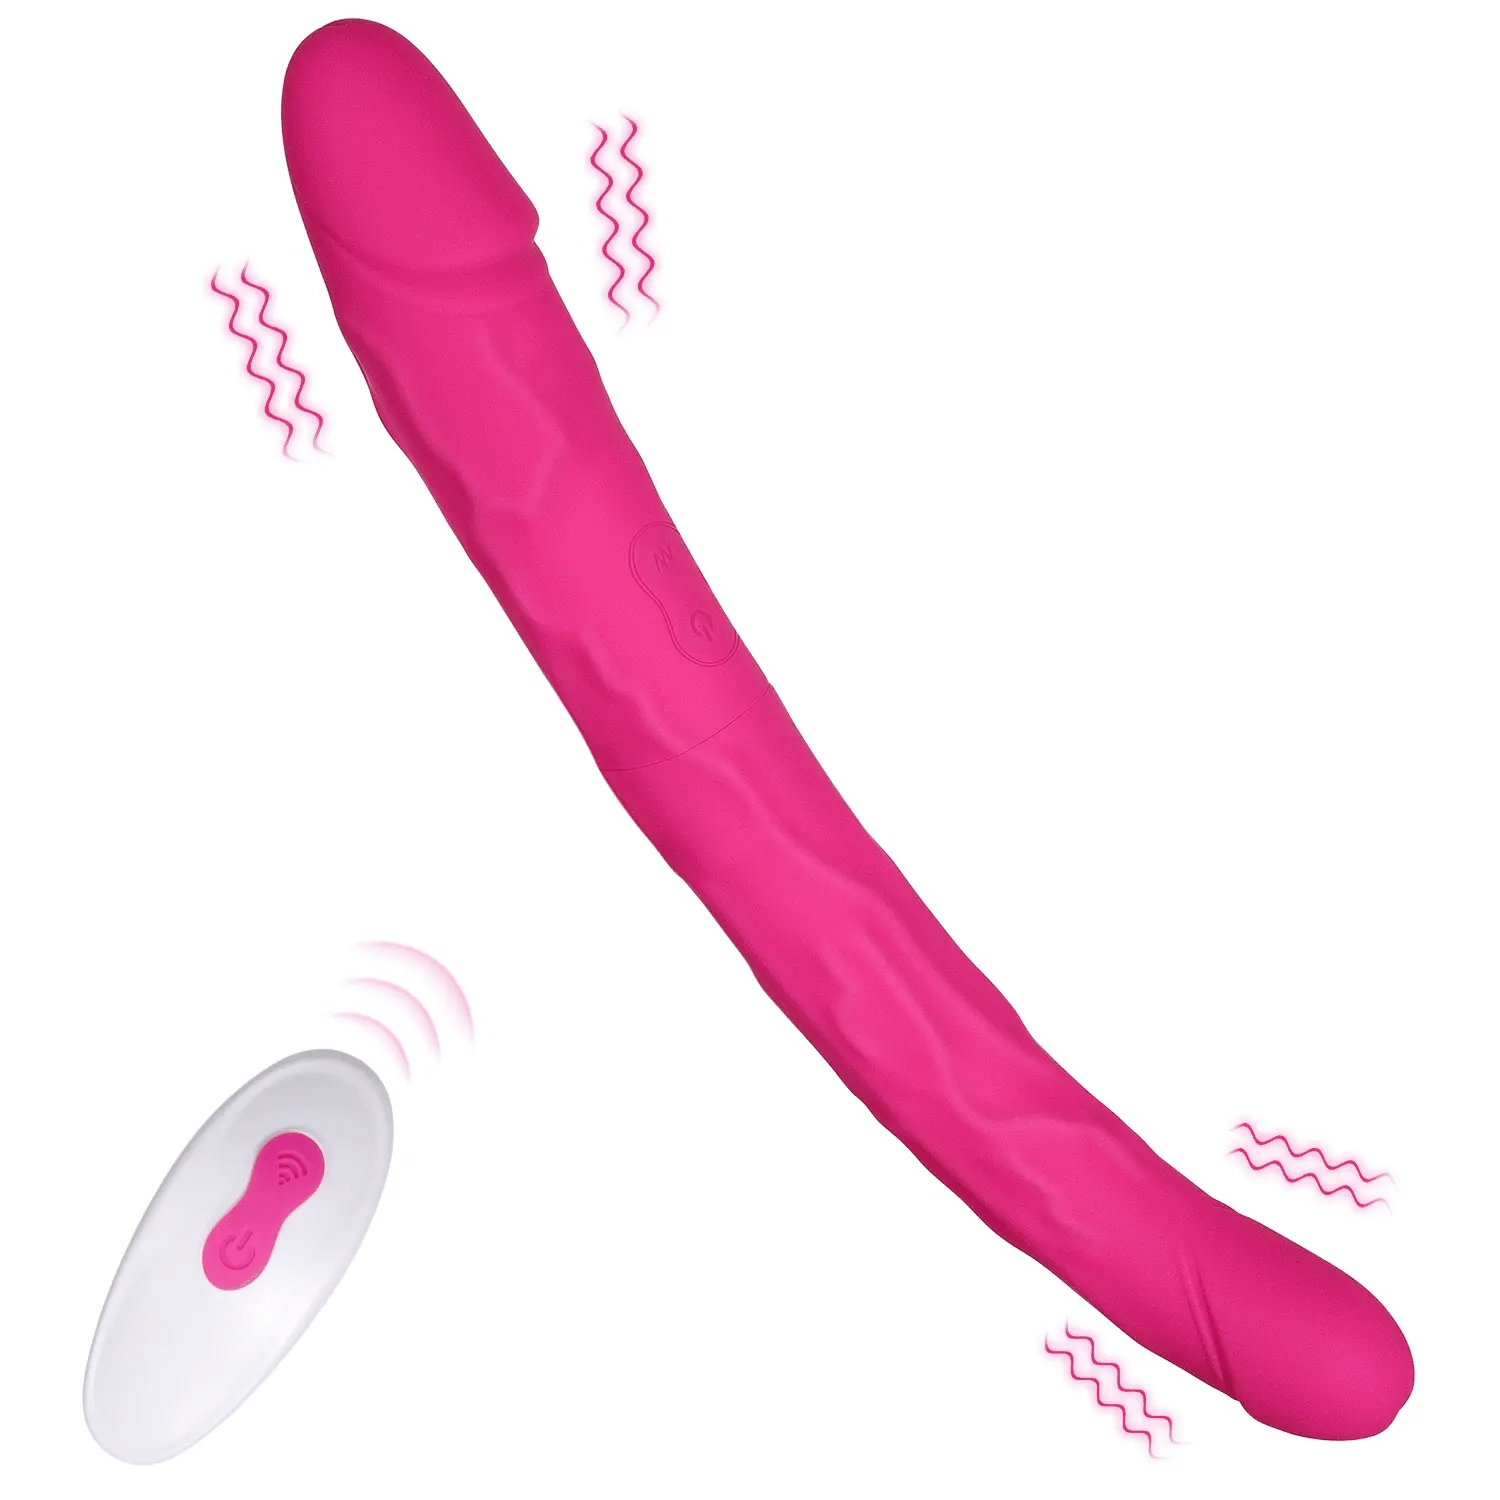 Nao - Double-Ended 12-inch Vibrating Dildo